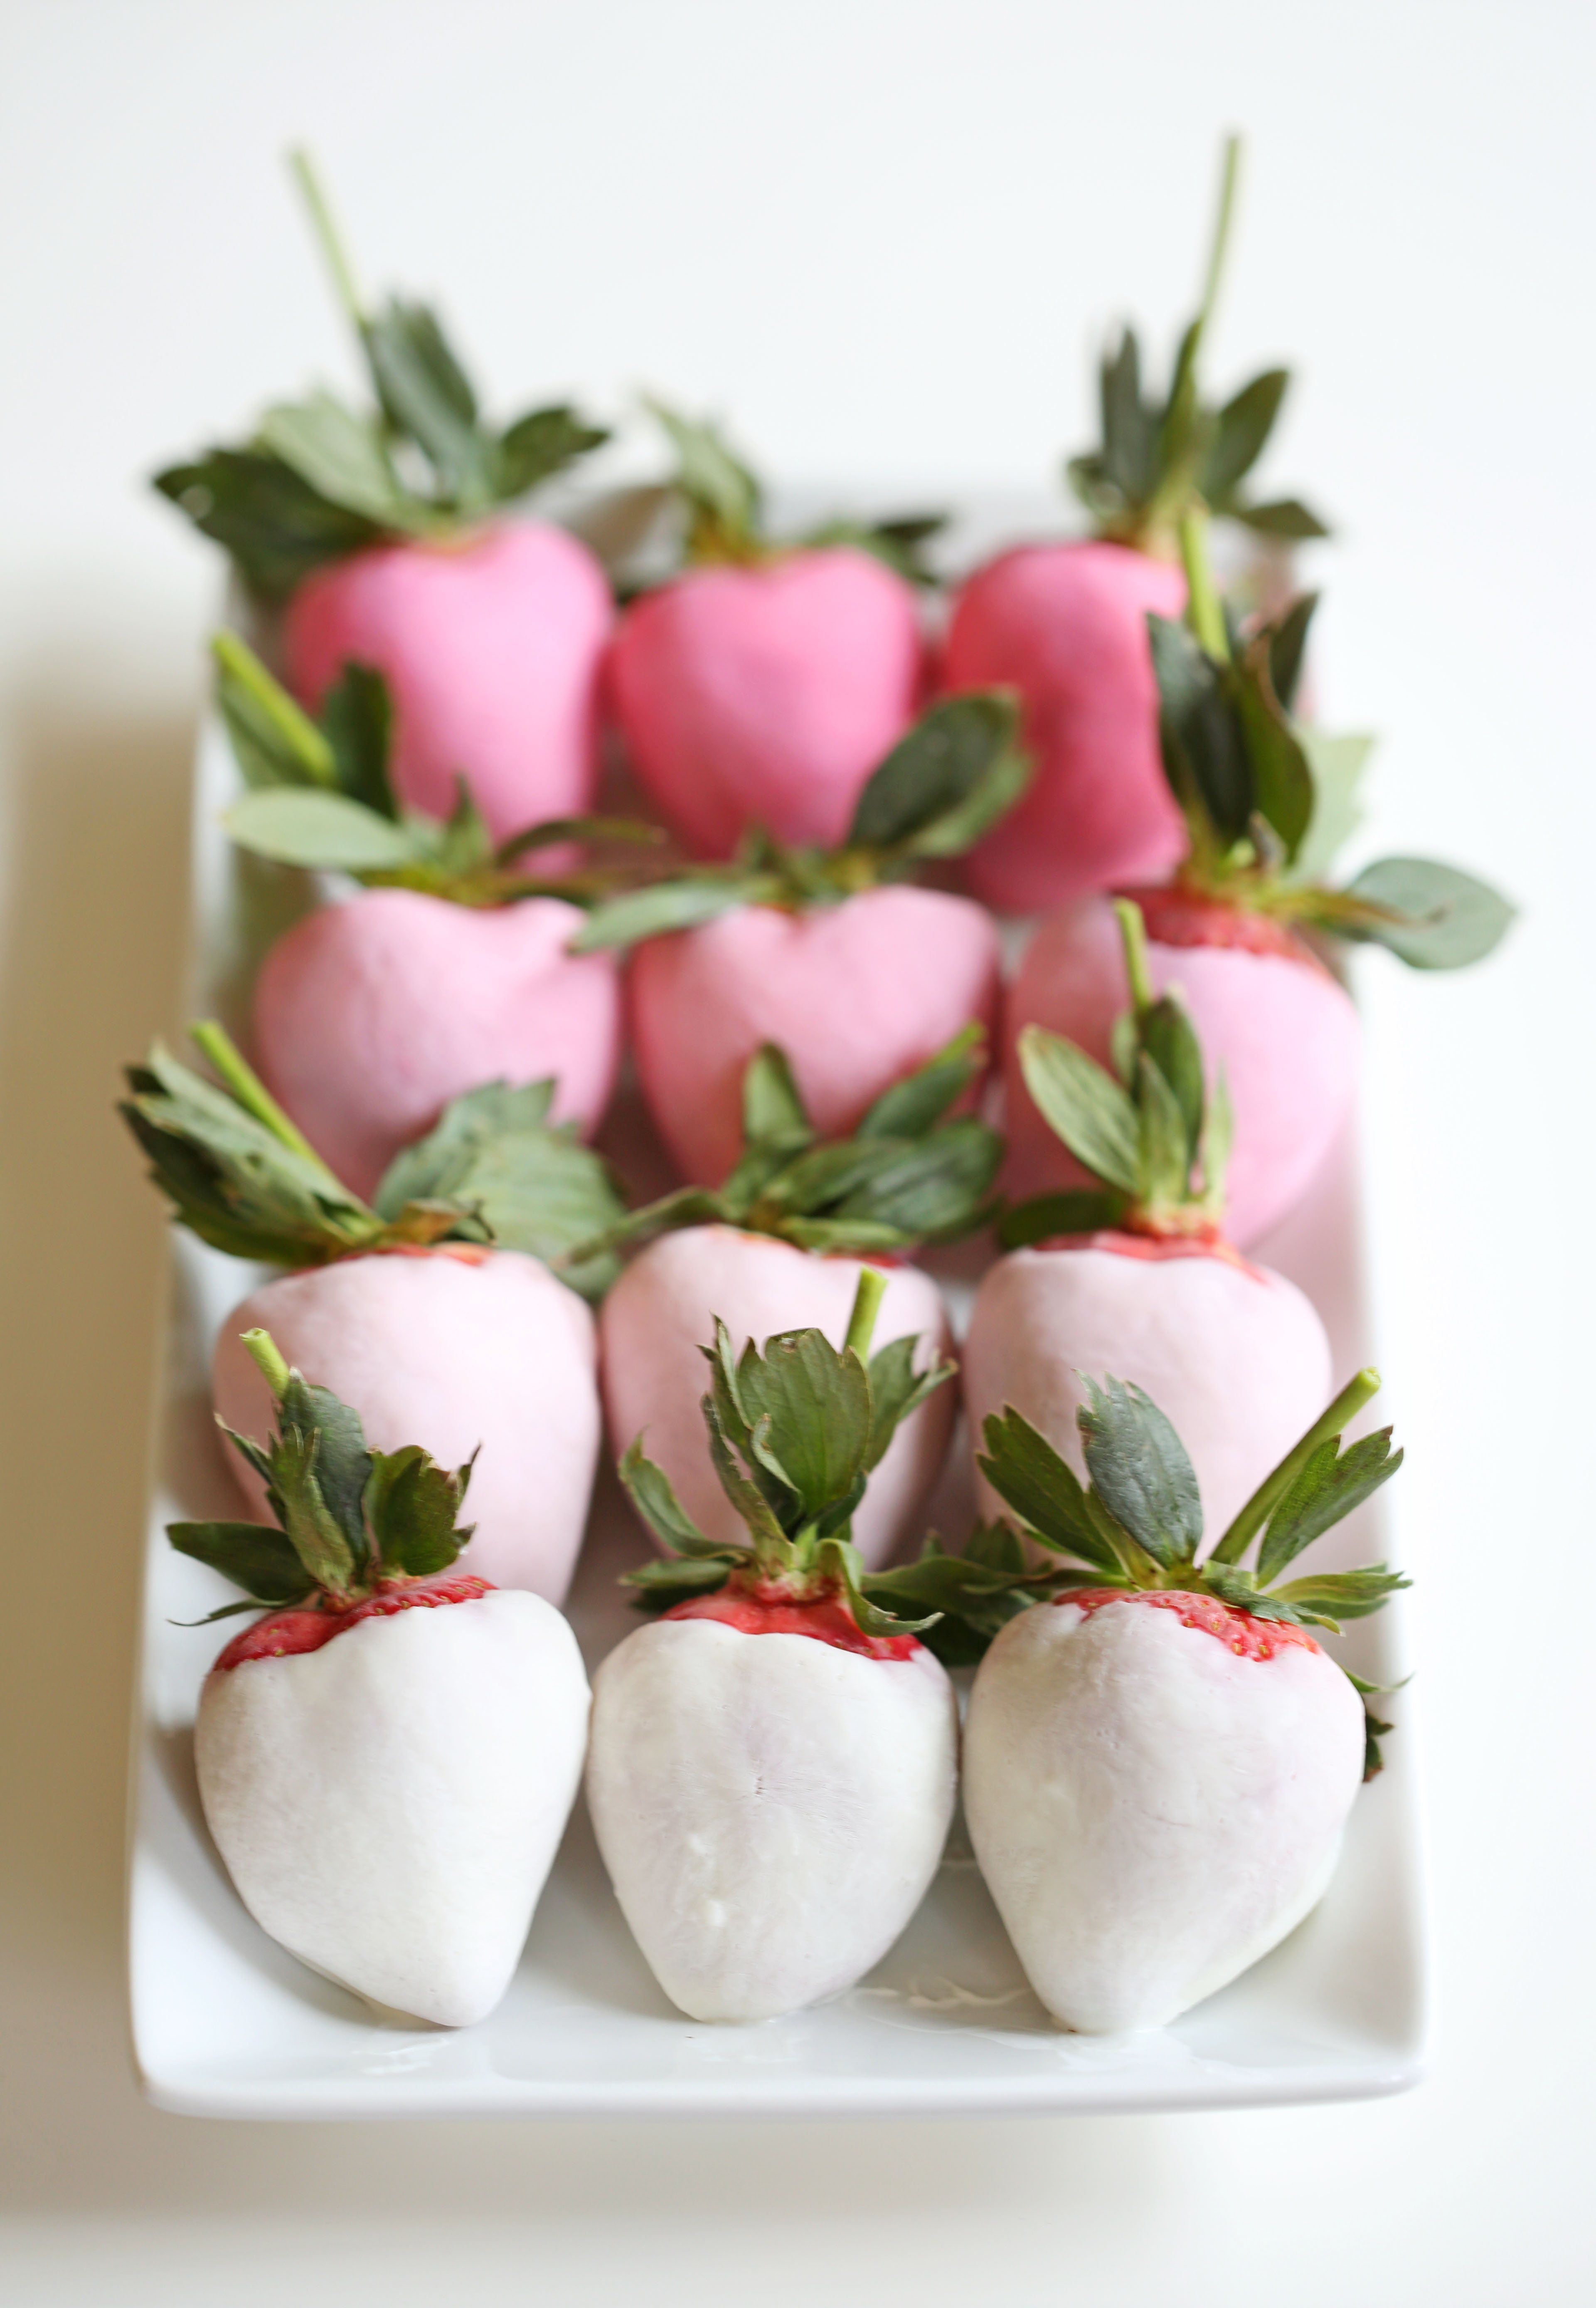 Yogurt Dipped Pink Ombre Strawberries for Valentine's Day! | Eat Yourself Skinny